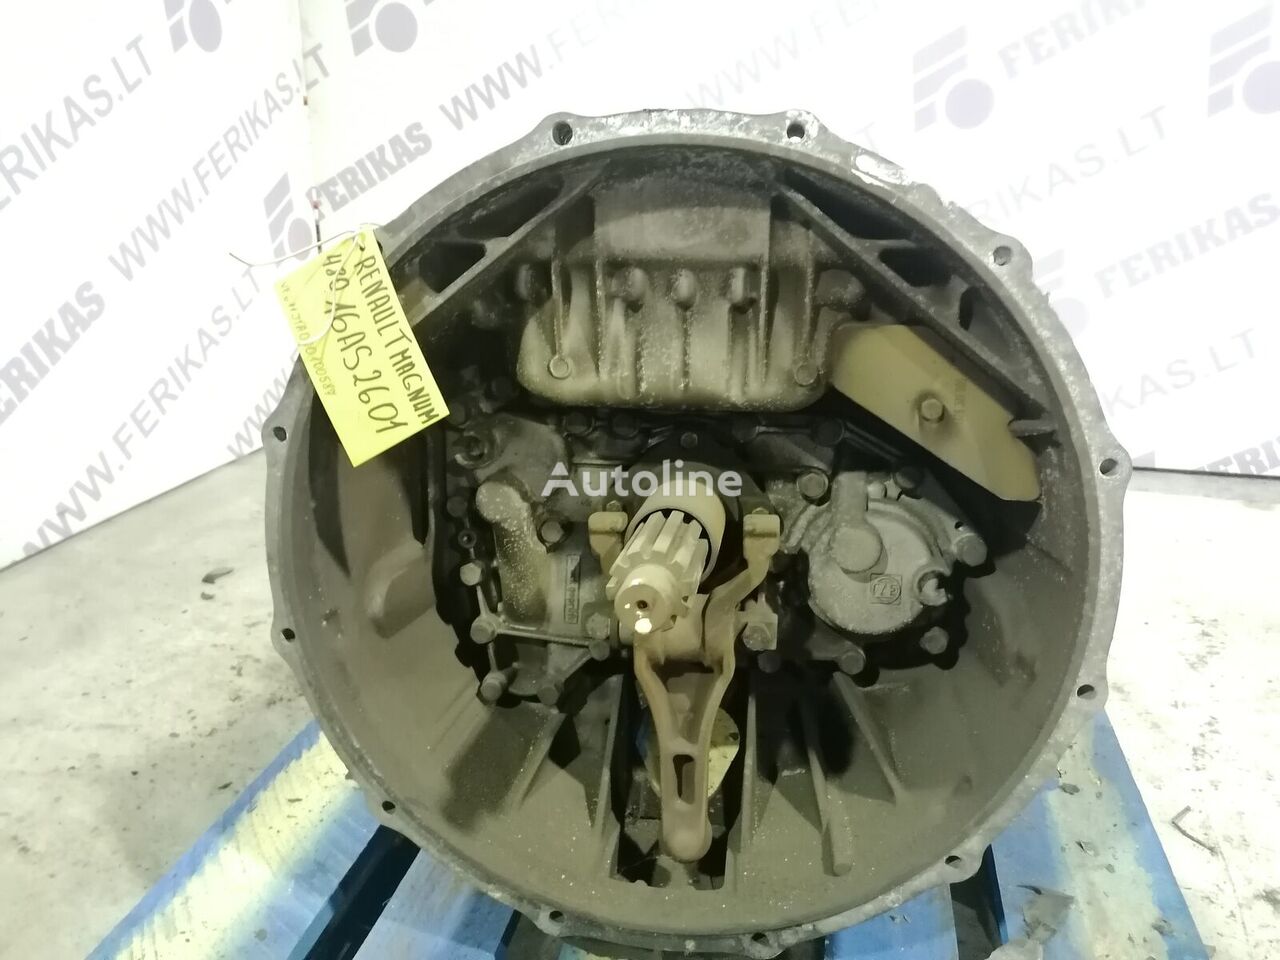 Renault 16as2601 gearbox for Renault magnum gearbox  truck tractor